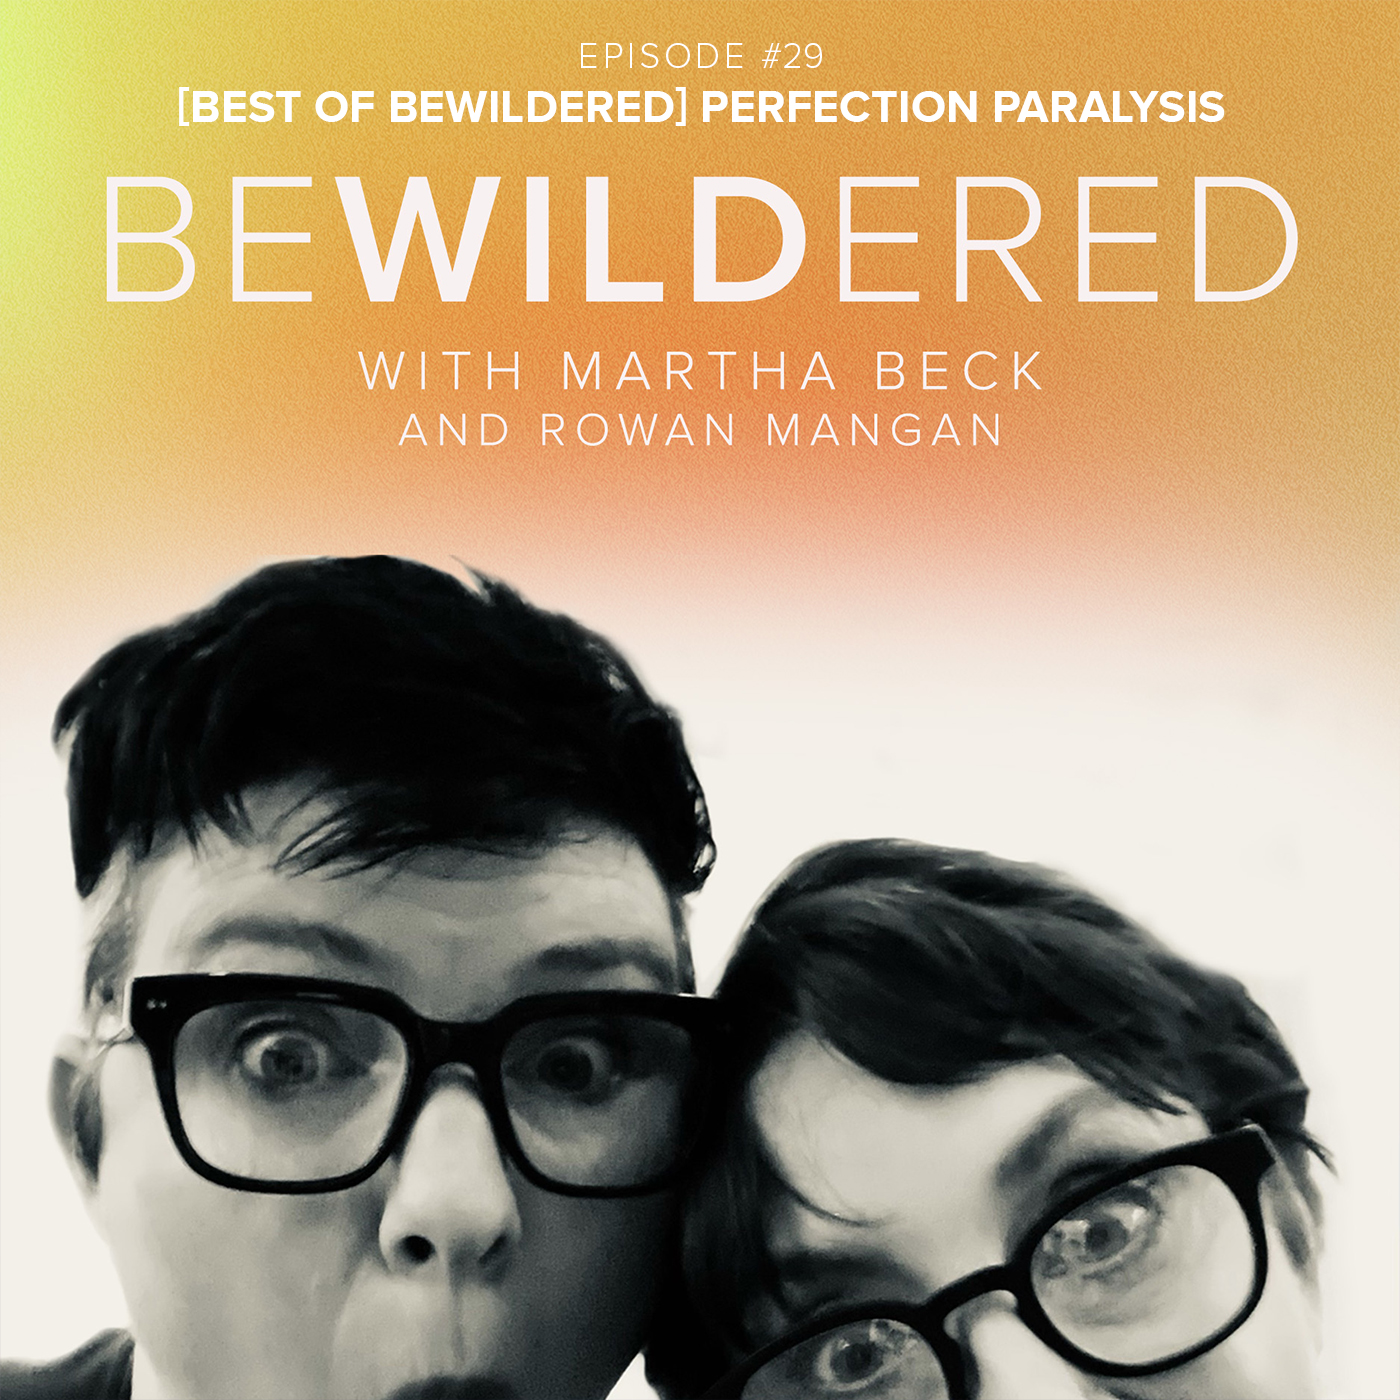 [Best of Bewildered] Perfection Paralysis